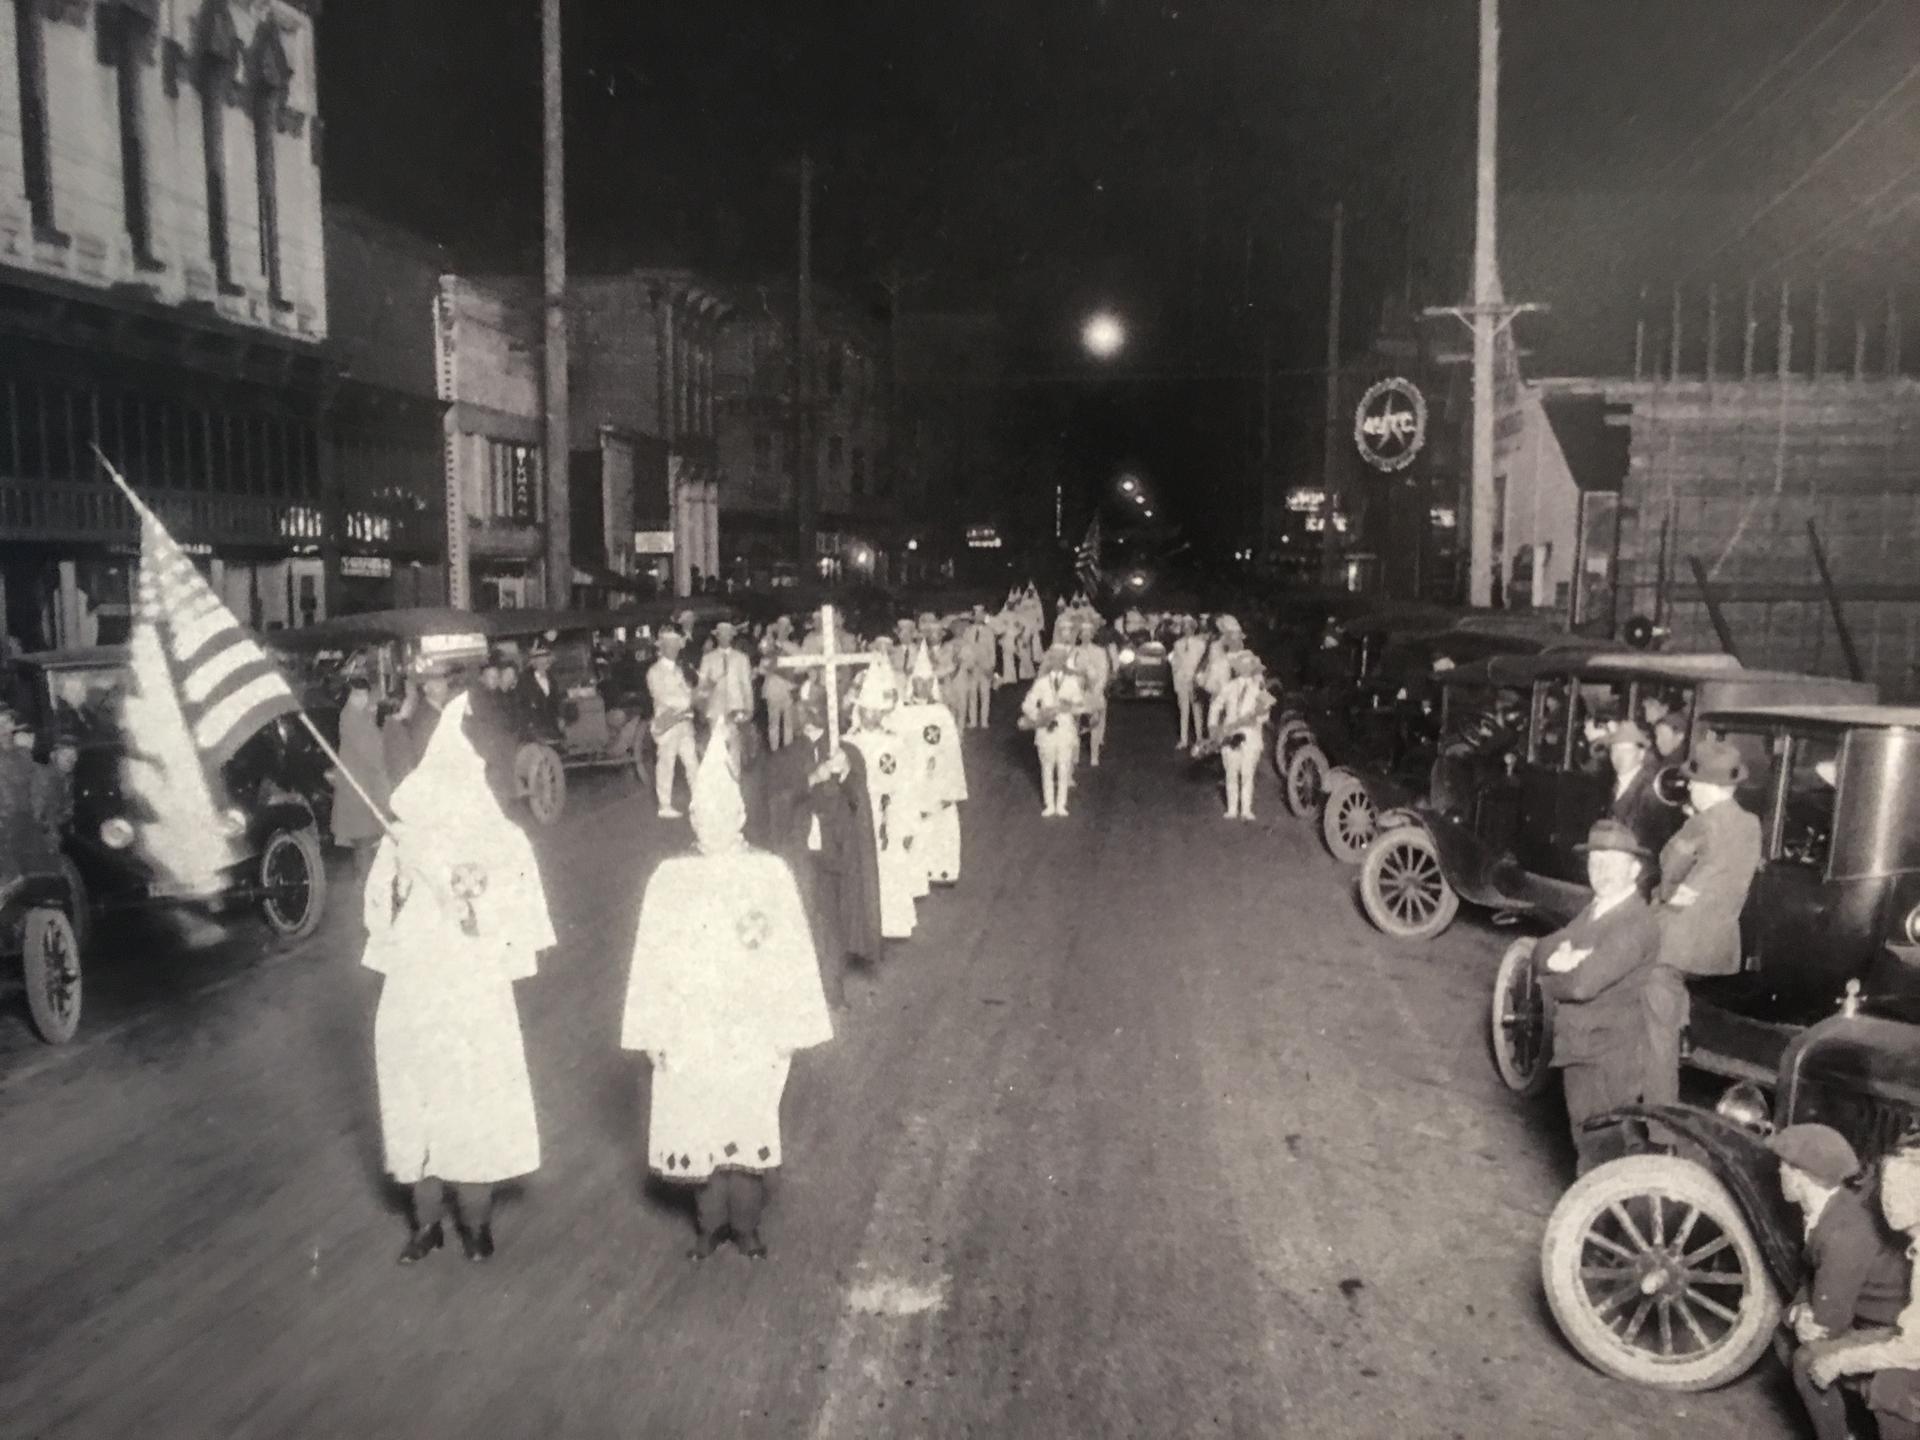 A 1923 Ku Klux Klan parade in Albany is pictured